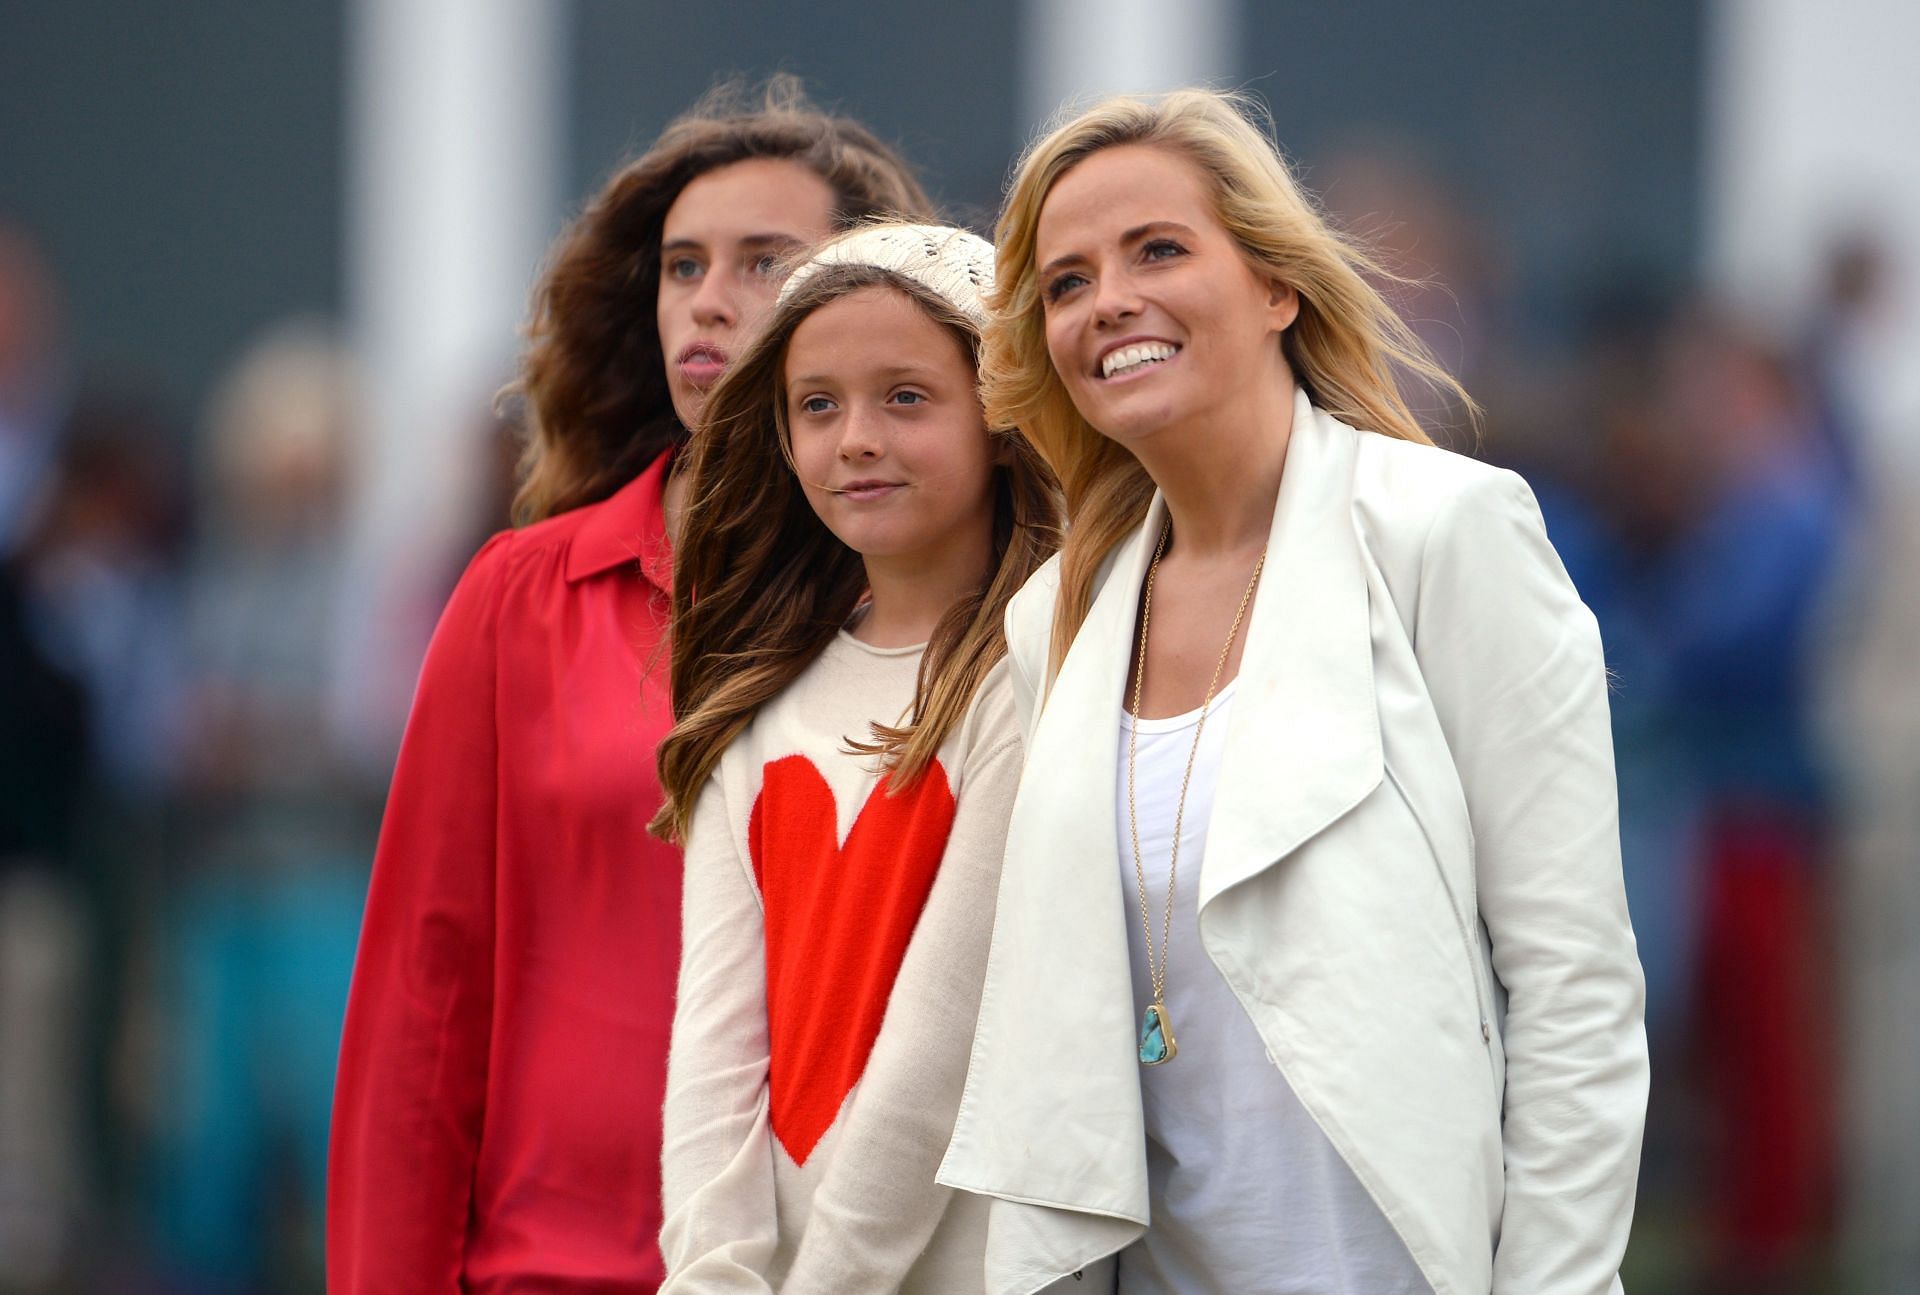 Amy &amp; Amanda Mickelson, 142nd Open Championship - Final Round (Image via Getty)